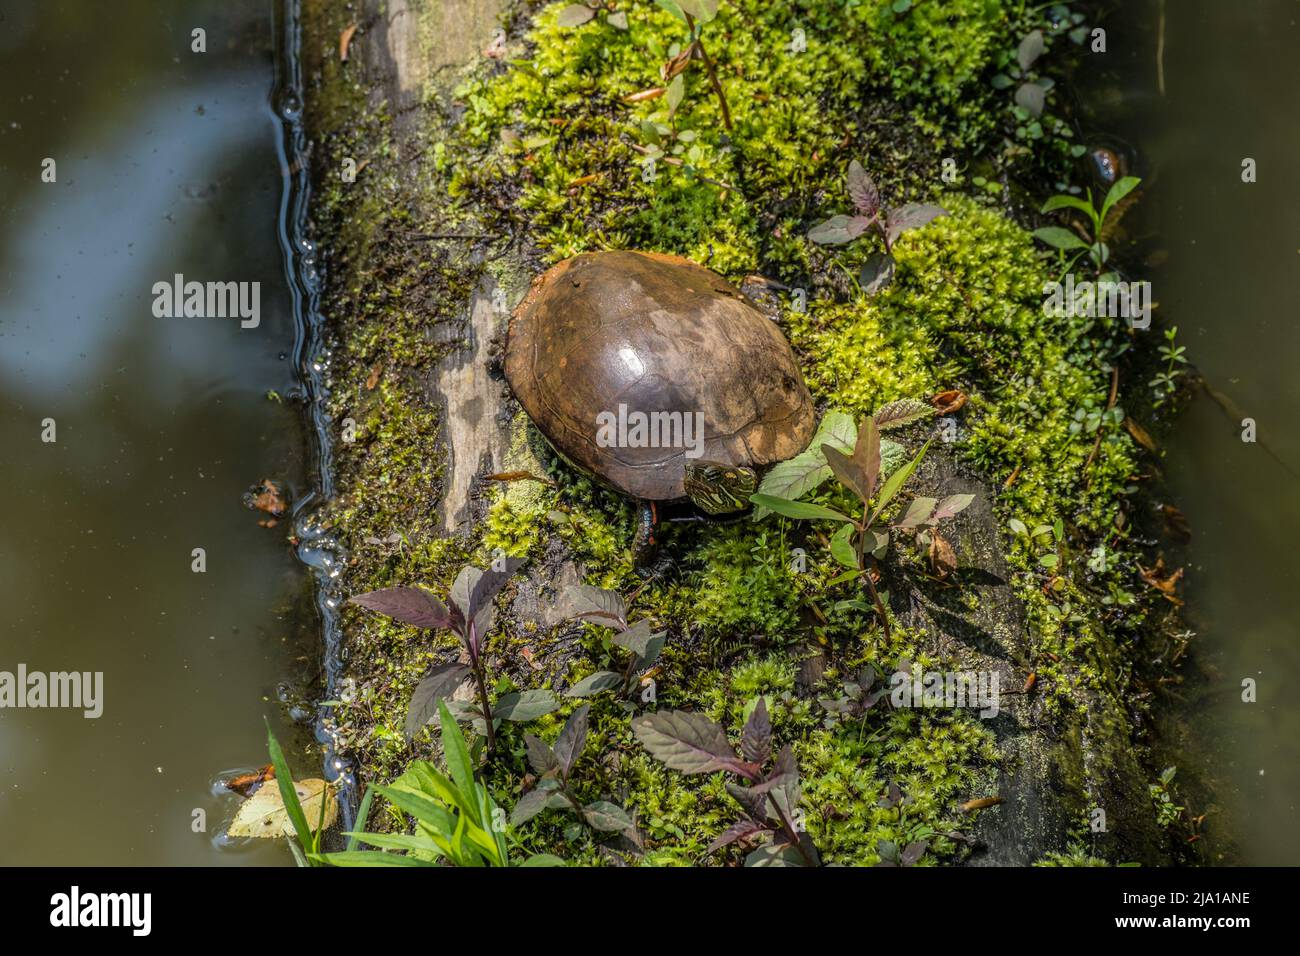 Adult painted turtle sunbathing on a log in the water covered with moss and plants at the wetlands on a sunny warm day in springtime Stock Photo